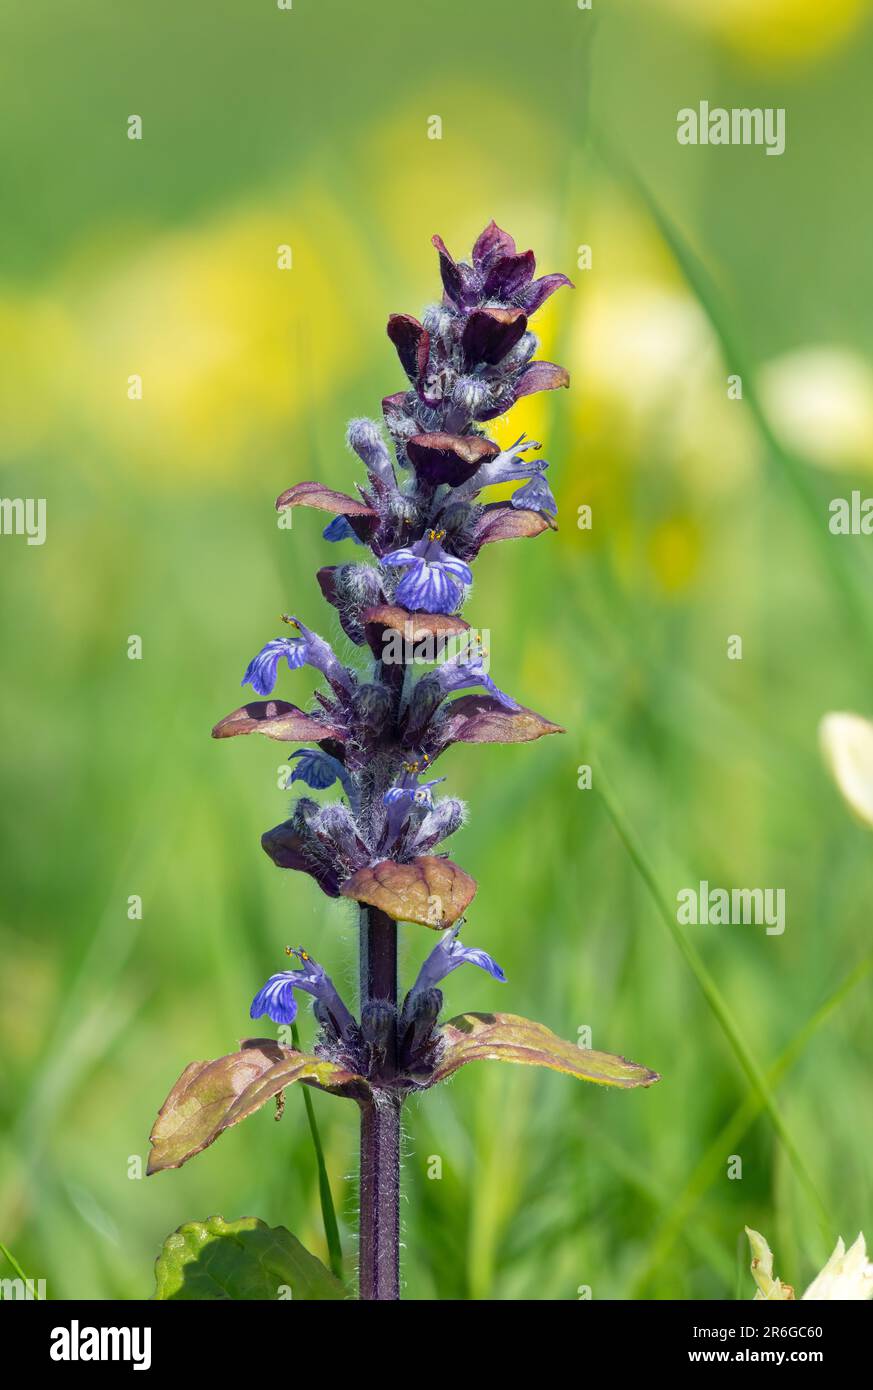 Close up of a bugle (ajuga reptans) flower in bloom Stock Photo